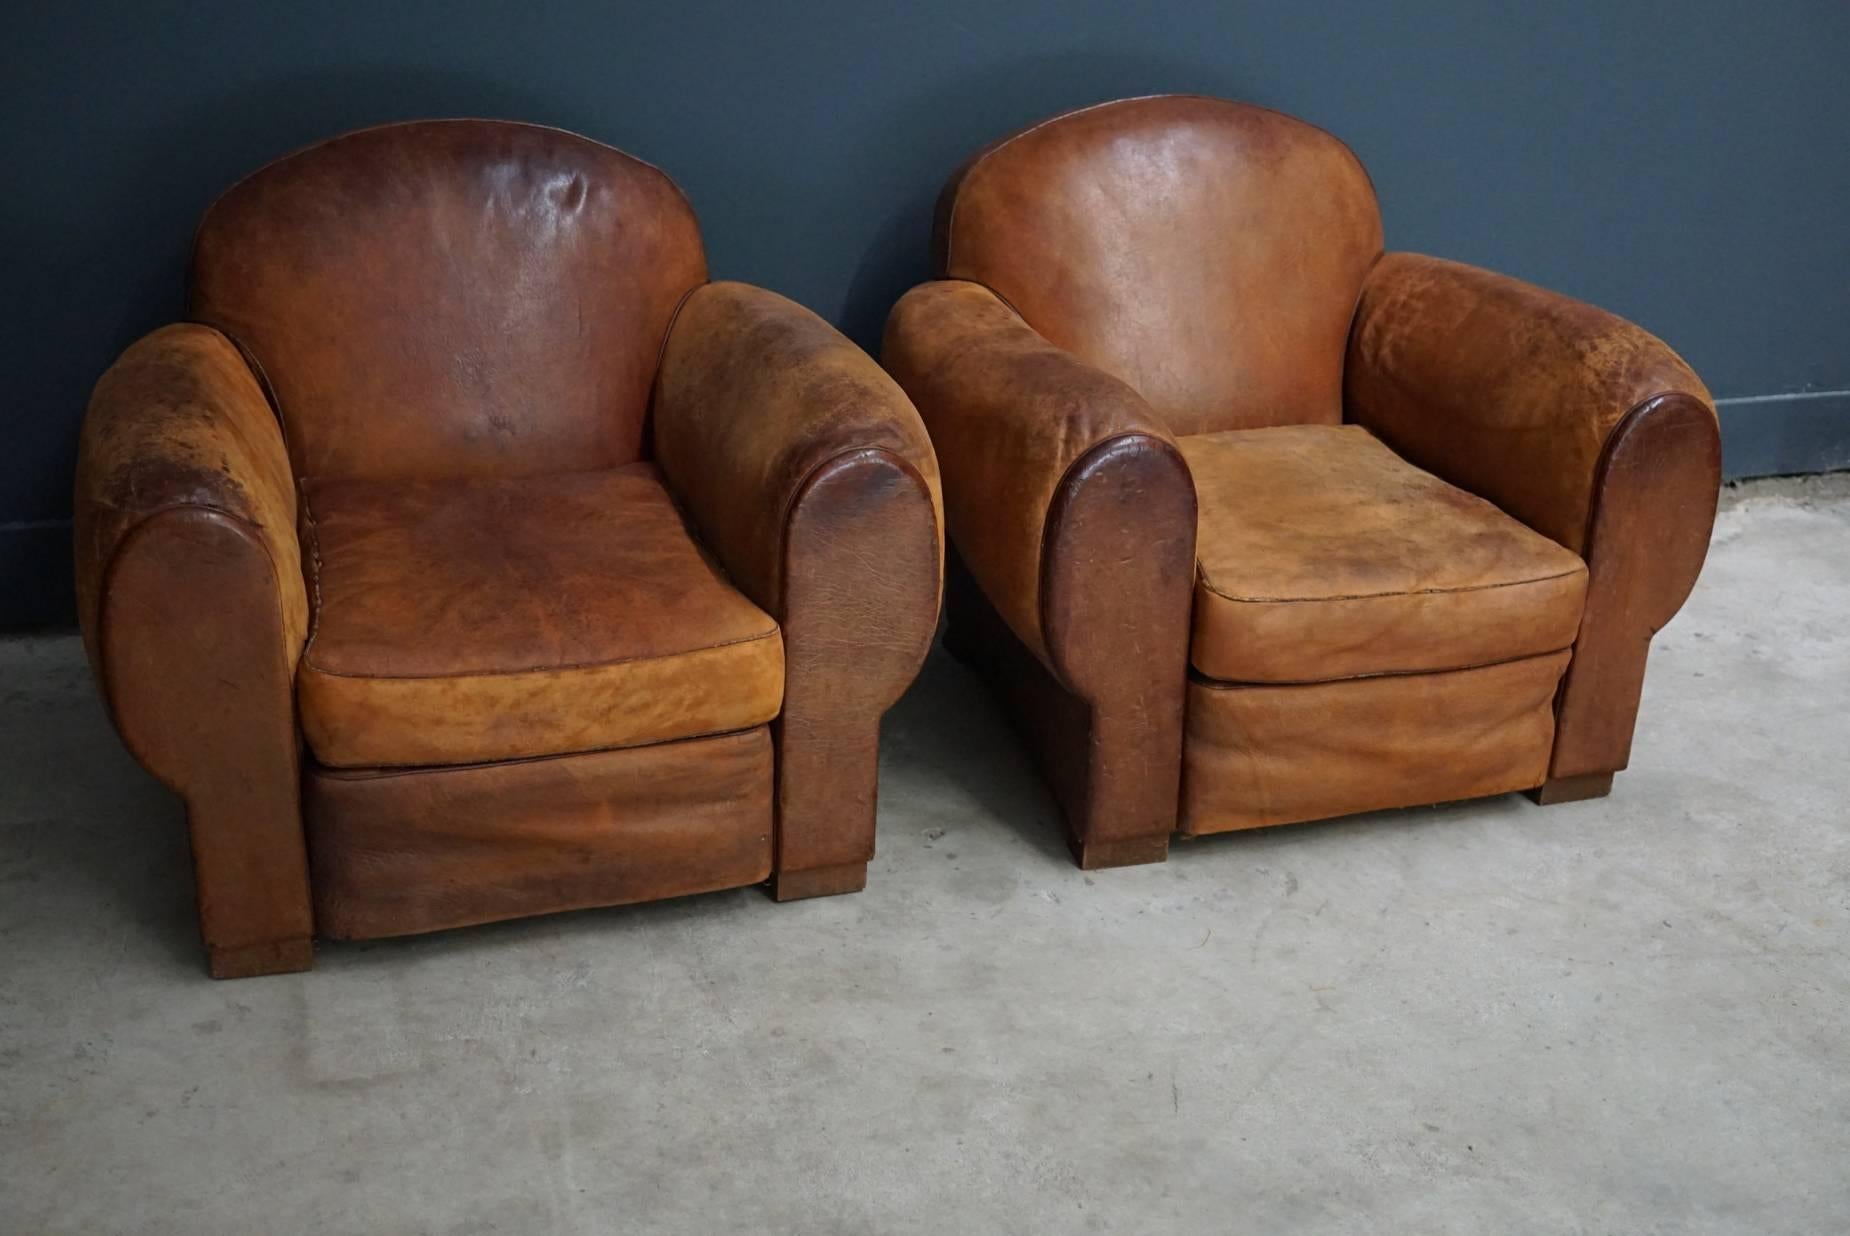 This pair of cognac-colored leather club chairs comes from France. They feature rivets and wooden legs.